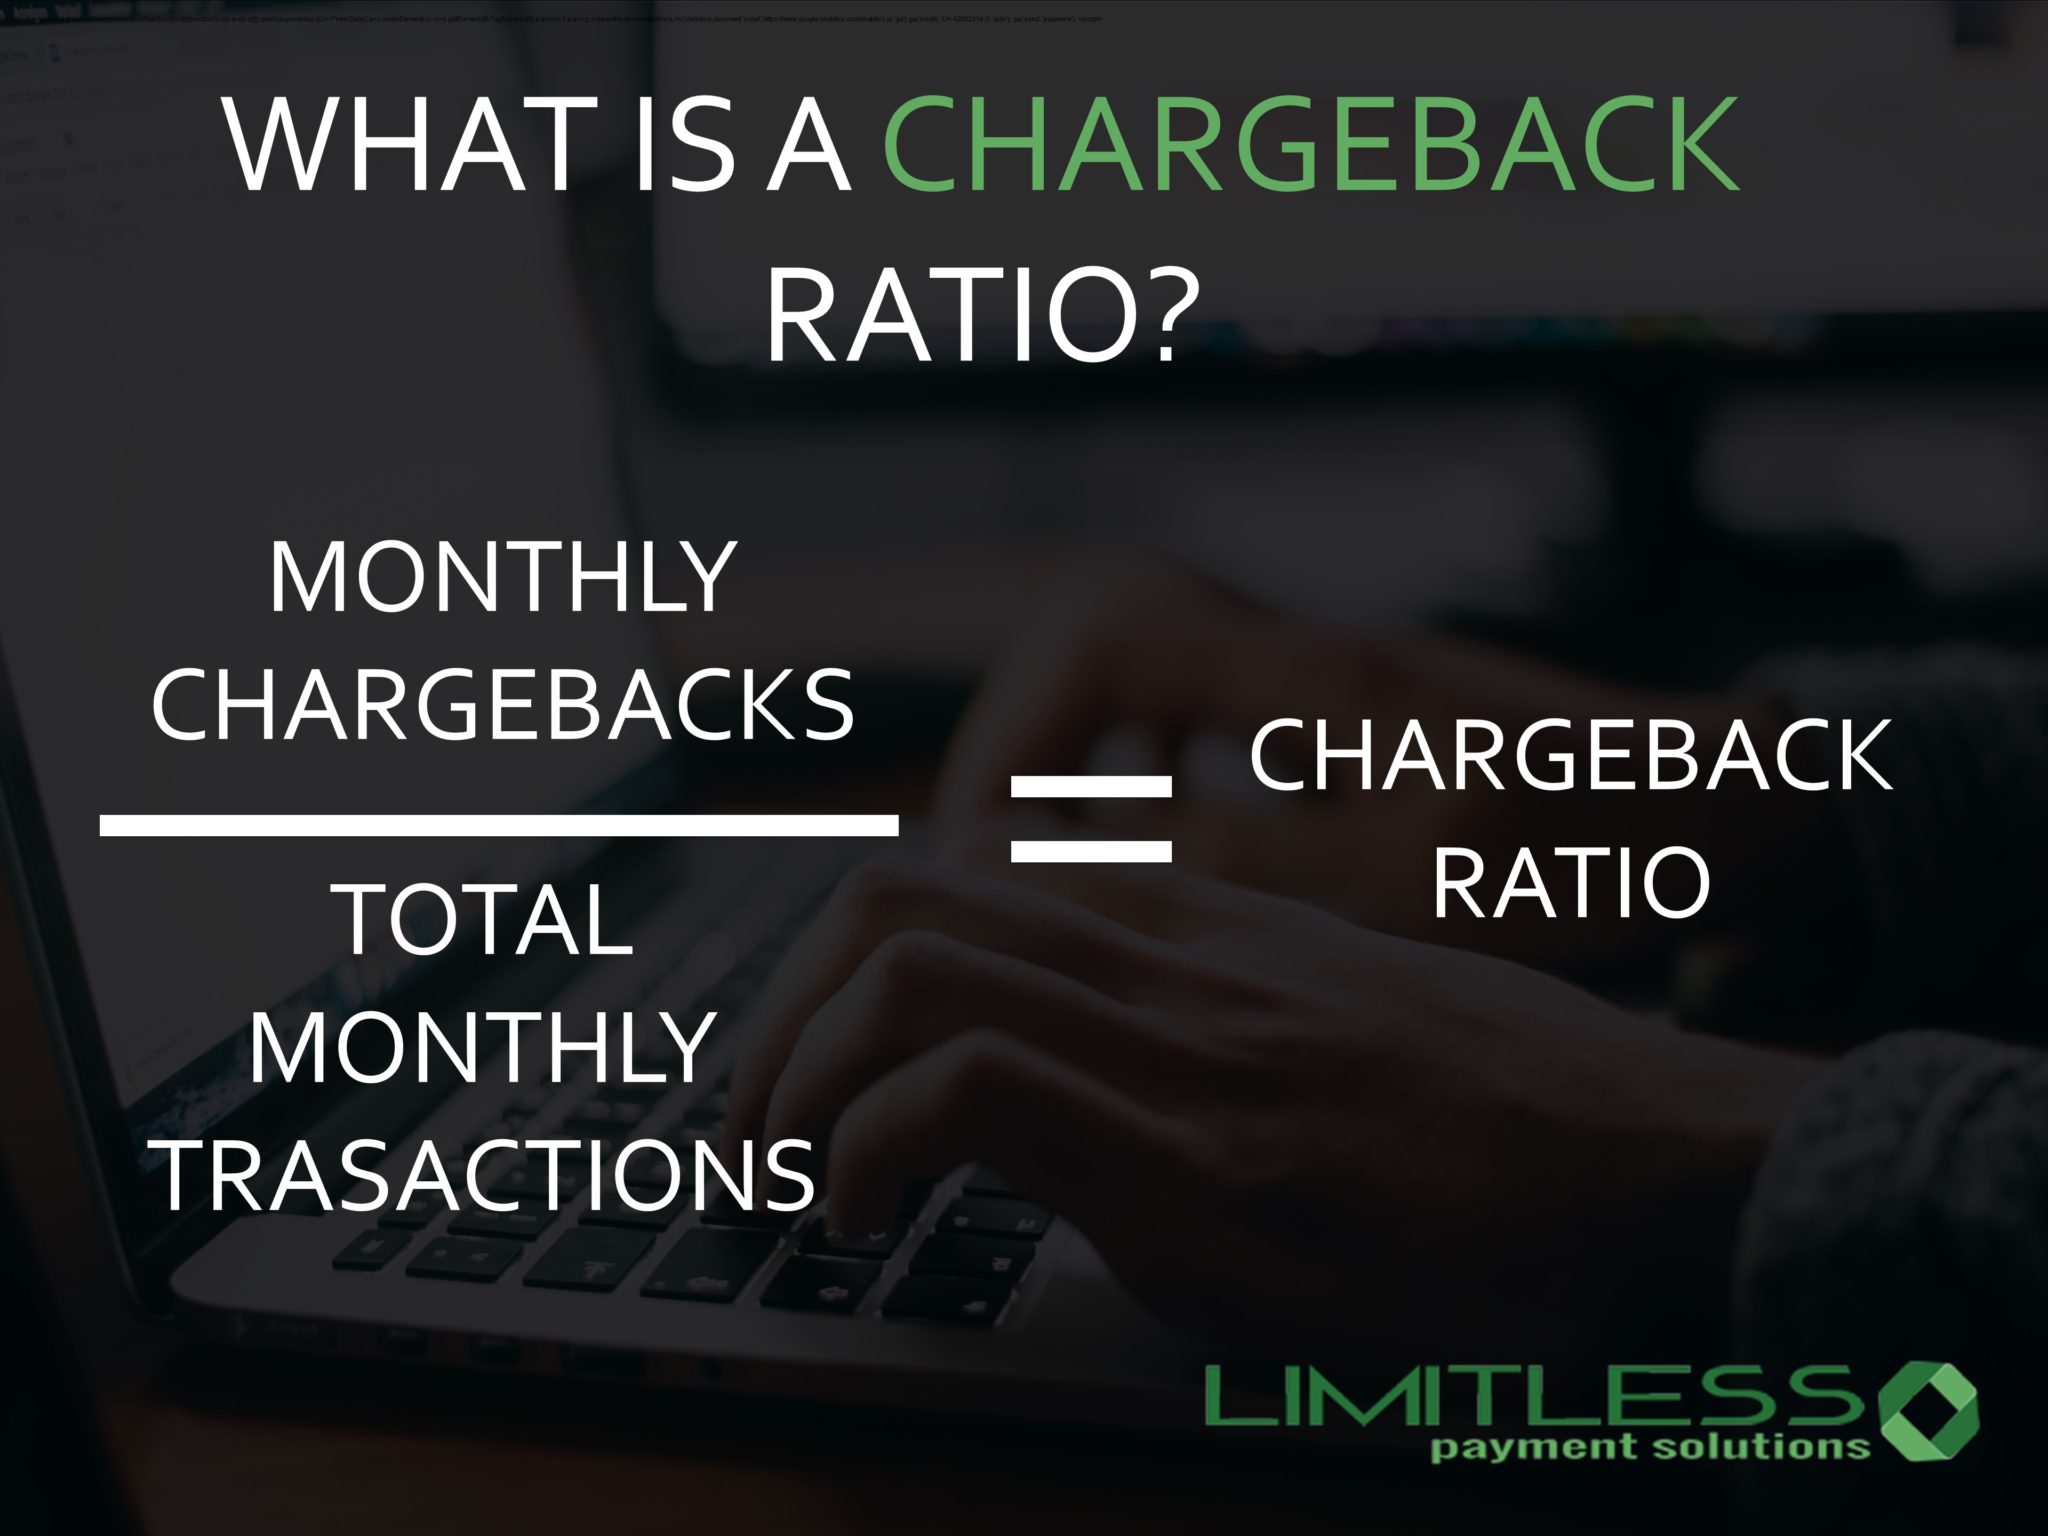 What is a chargeback ratio?